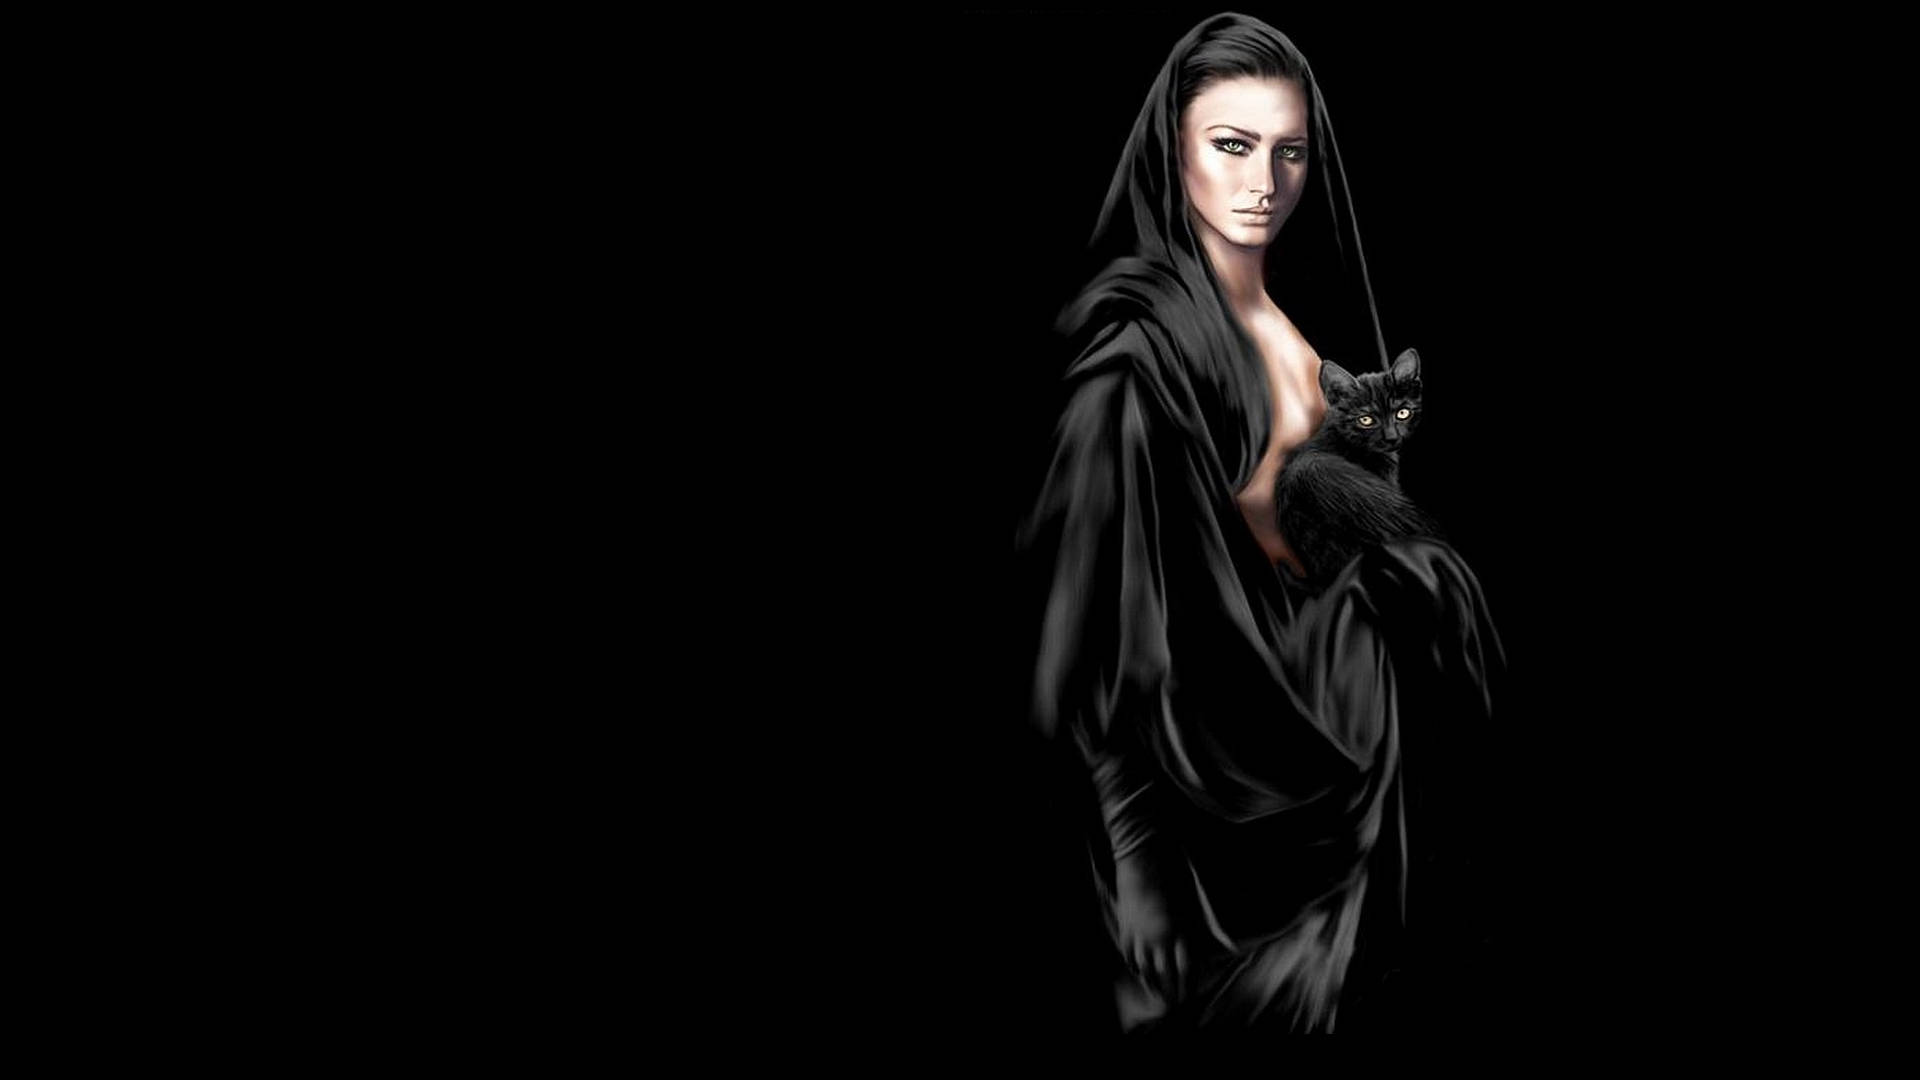 Mysterious Cat Lady in Stylish Black Outfit Wallpaper